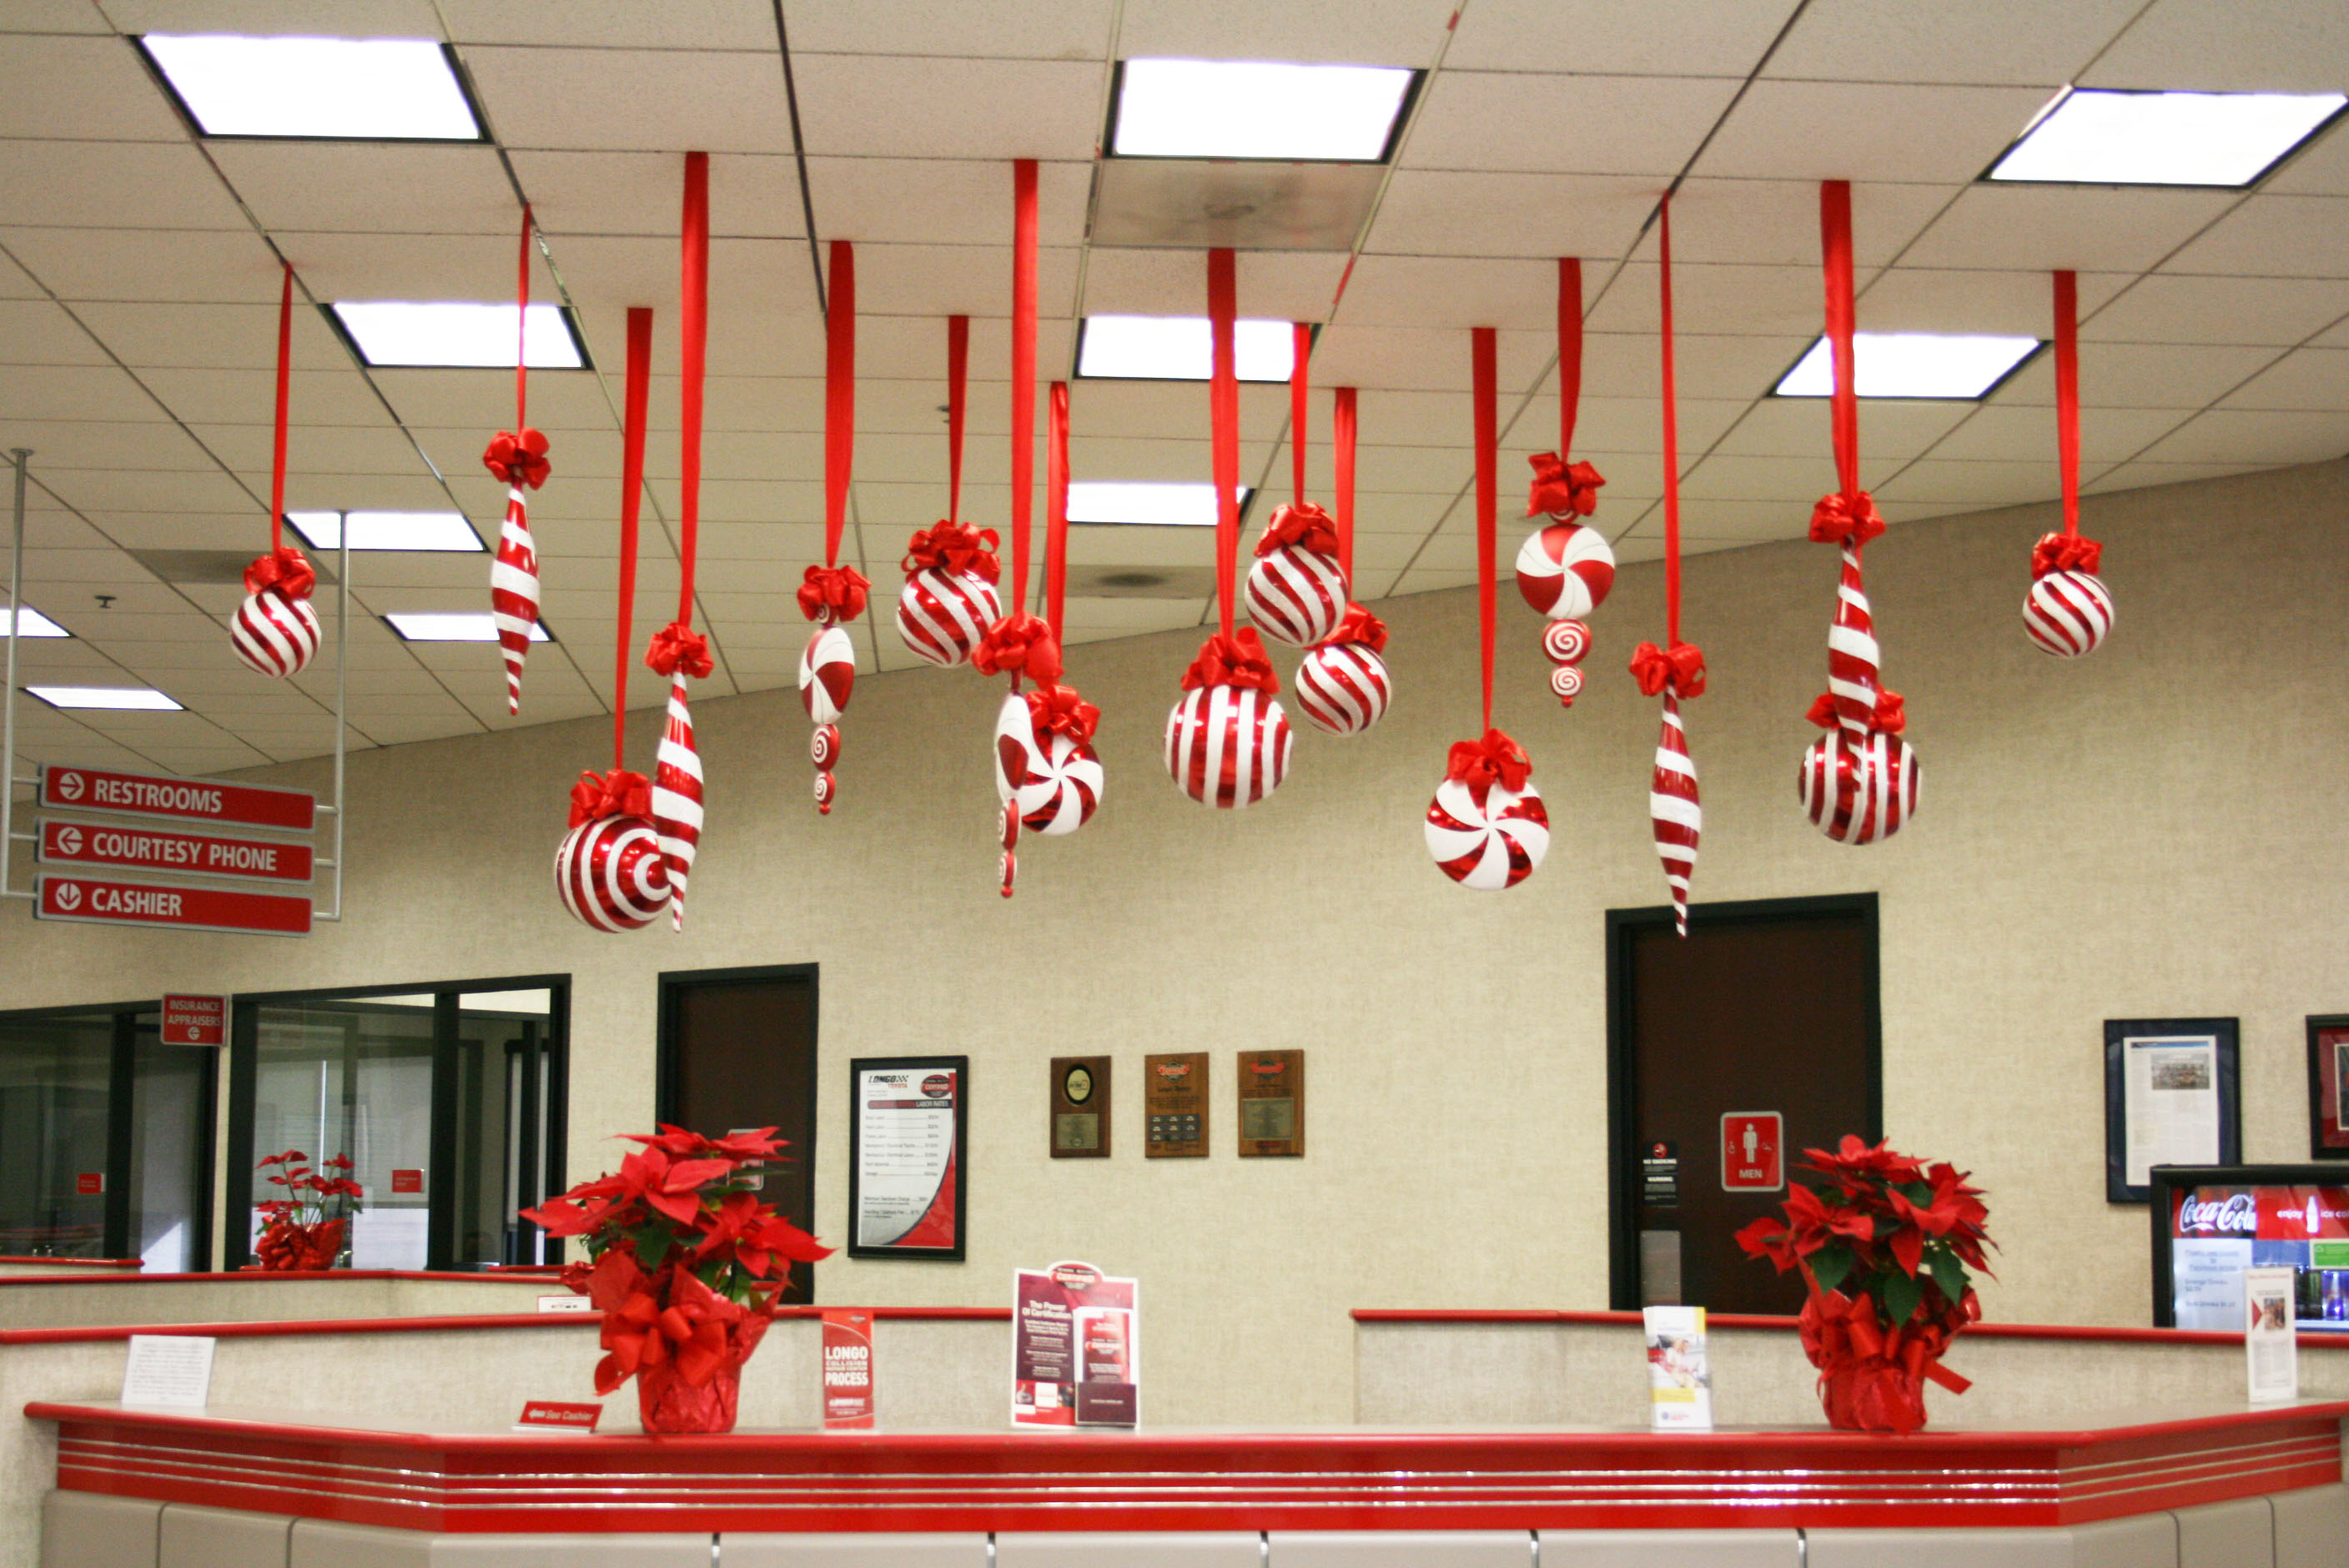 ideas-inspiration-beautiful-handcrafted-red-ribbon-hanging-on-white-ceiling-over-counter-desk-office-as-christmas-office-decoration-ideas-spellbinding-christmas-office-decoration-themes-and-pictures